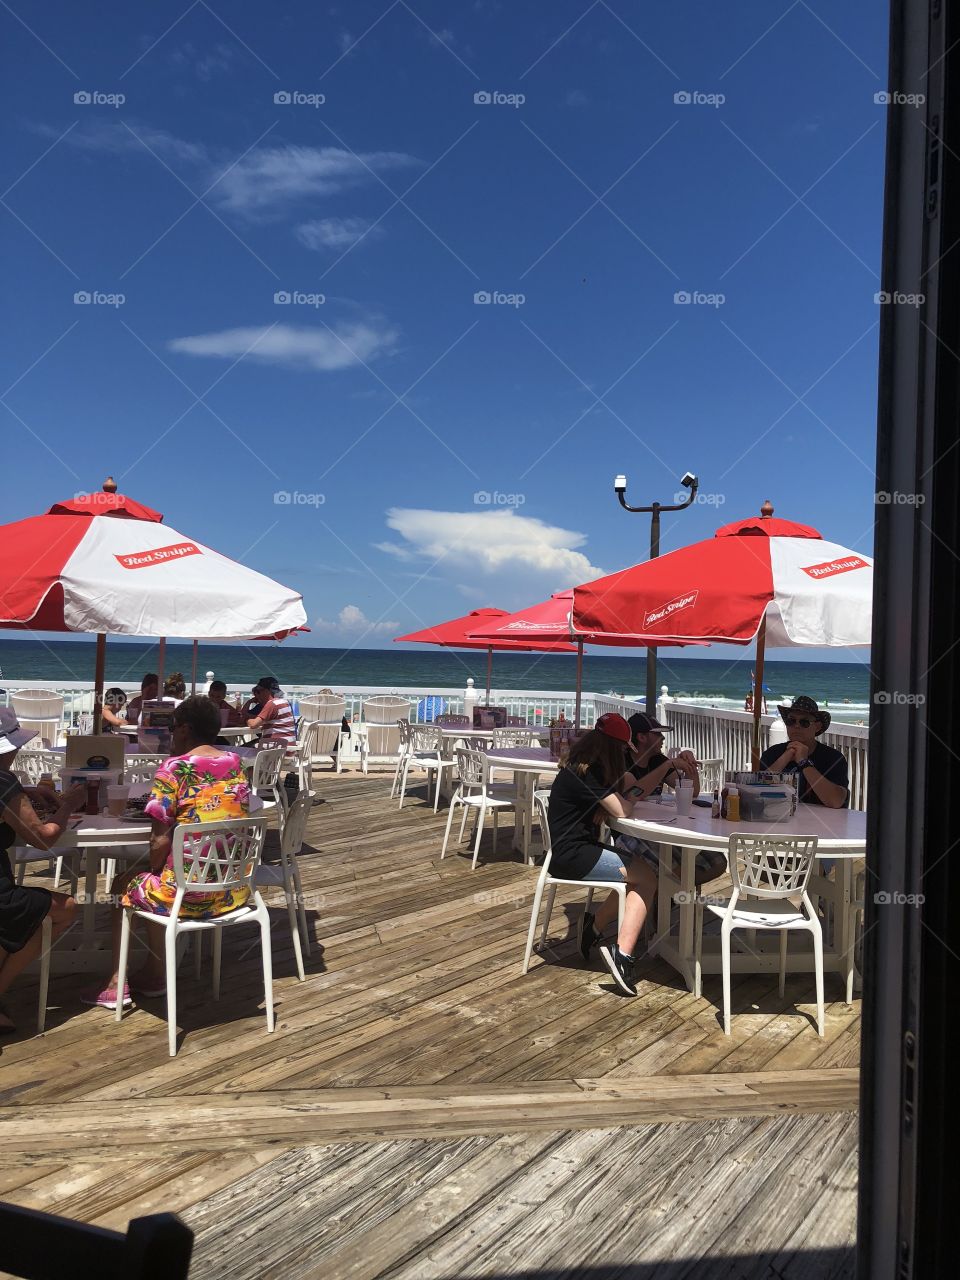 A beautiful ocean view at a restaurant in Ponce Inlet, Florida. It was a gorgeous day right around Fourth of July, everyone was enjoying a wonderful meal while listening to the waves crash on the beach. 